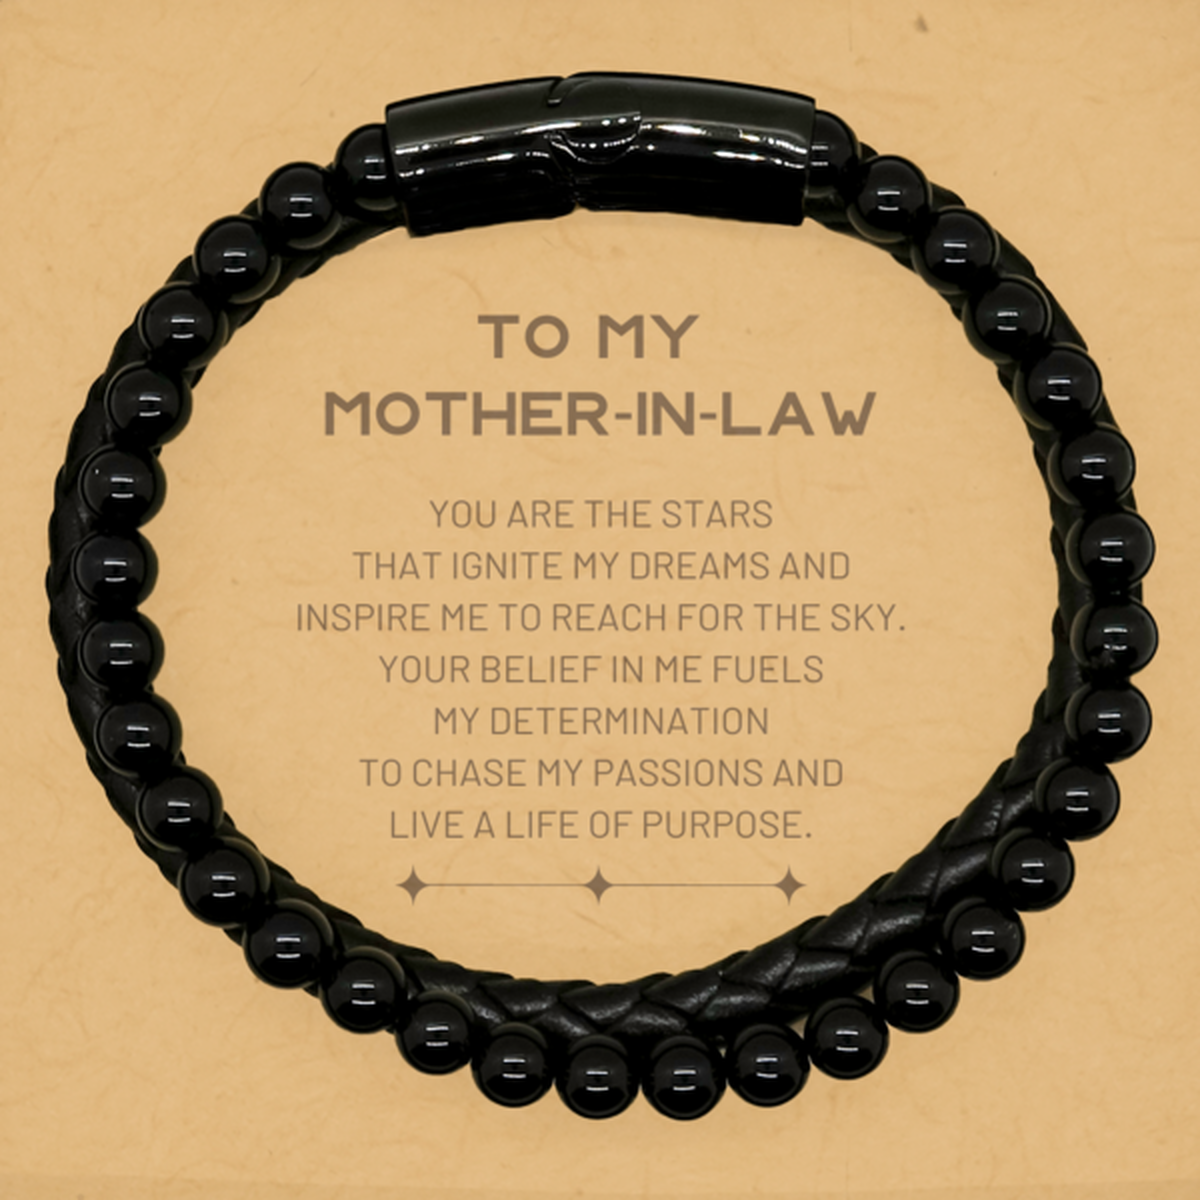 To My Mother-In-Law Stone Leather Bracelets, You are the stars that ignite my dreams and inspire me to reach for the sky, Birthday Unique Gifts For Mother-In-Law, Thank You Gifts For Mother-In-Law